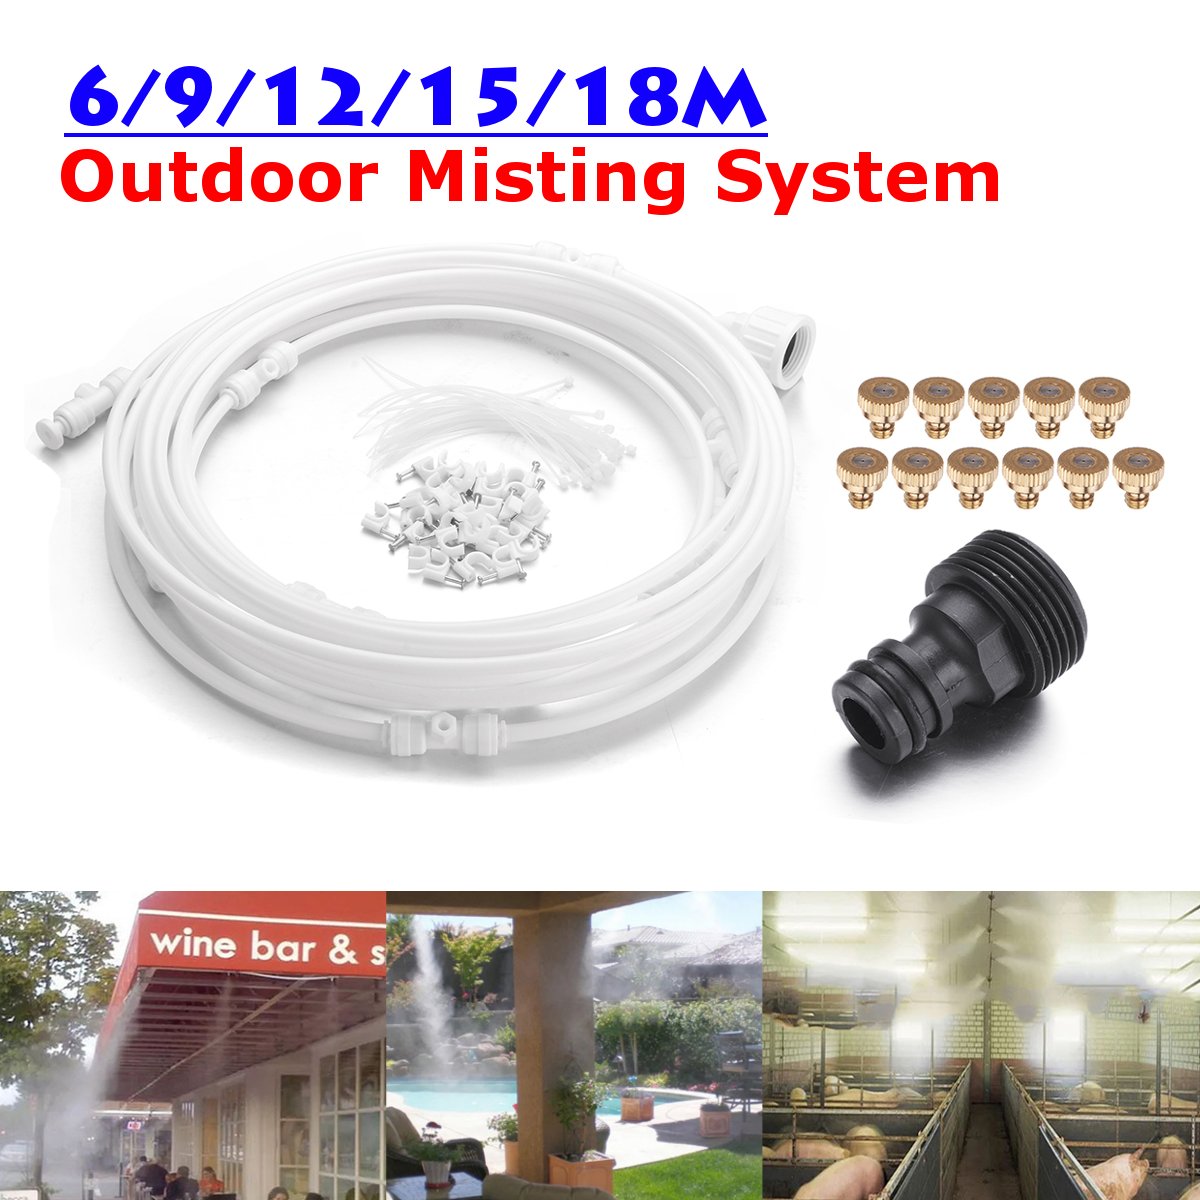 69121518M-Outdoor-Misting-Cooling-System-Garden-Drip-Irrigation-Water-Mister-Nozzles-Set-1522847-1